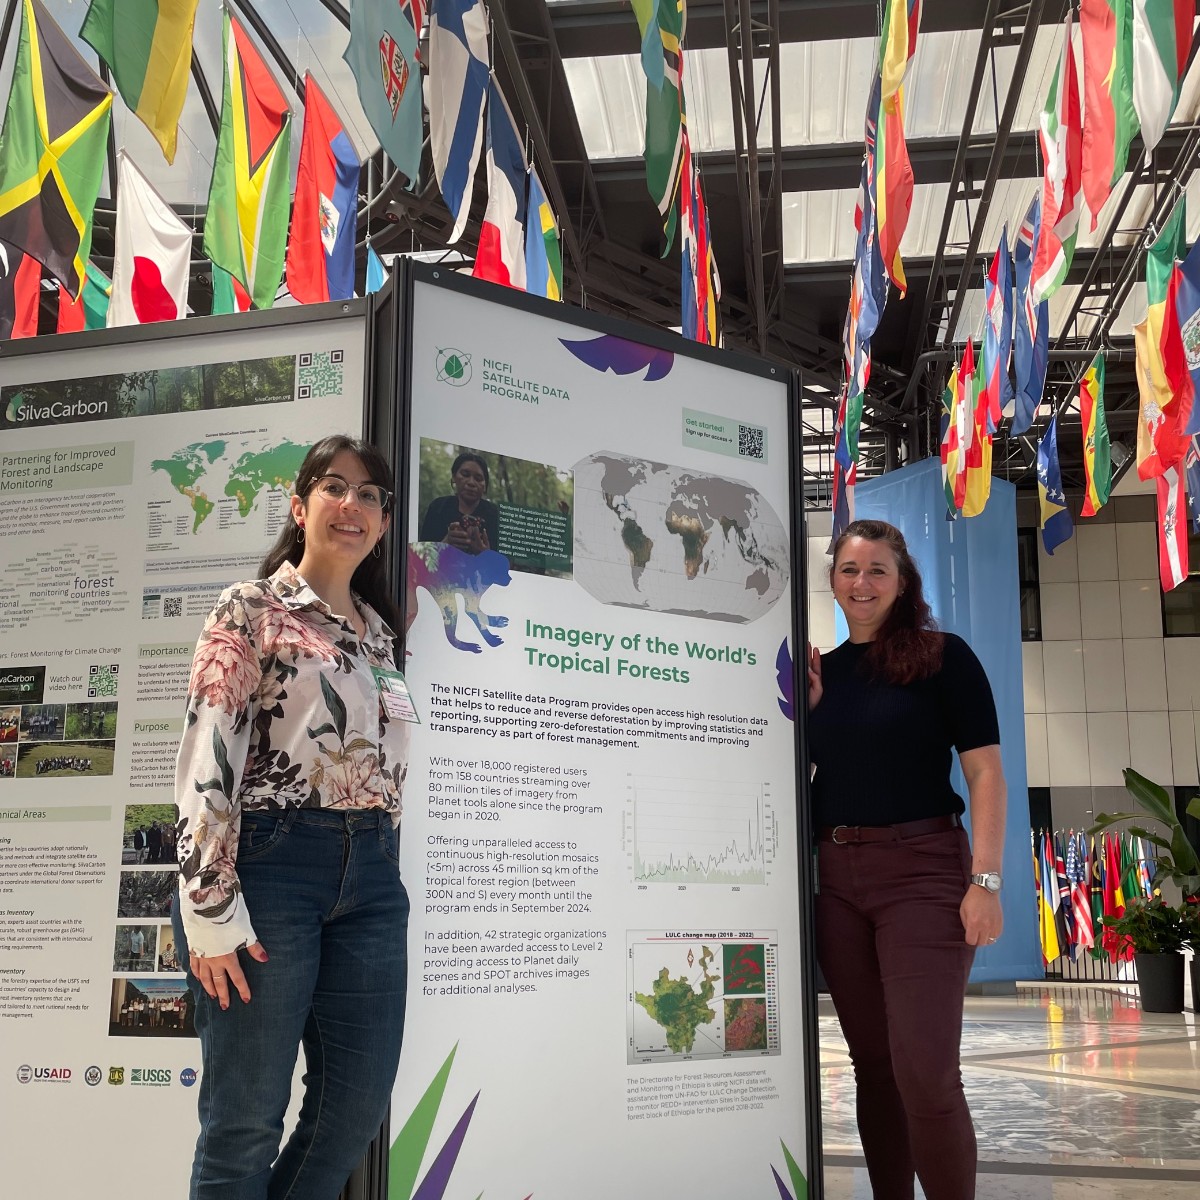 Our International Sales Manager Laura Abuja Conde and Senior Project Manager Charlotte Bishop are in Rome this week for the @gfoi_forest plenary at @FAO HQ, representing the @NICFISatData Program that KSAT leads together with @planet and @Airbus   🍃🛰️  #GFOI2023 @Climateforest